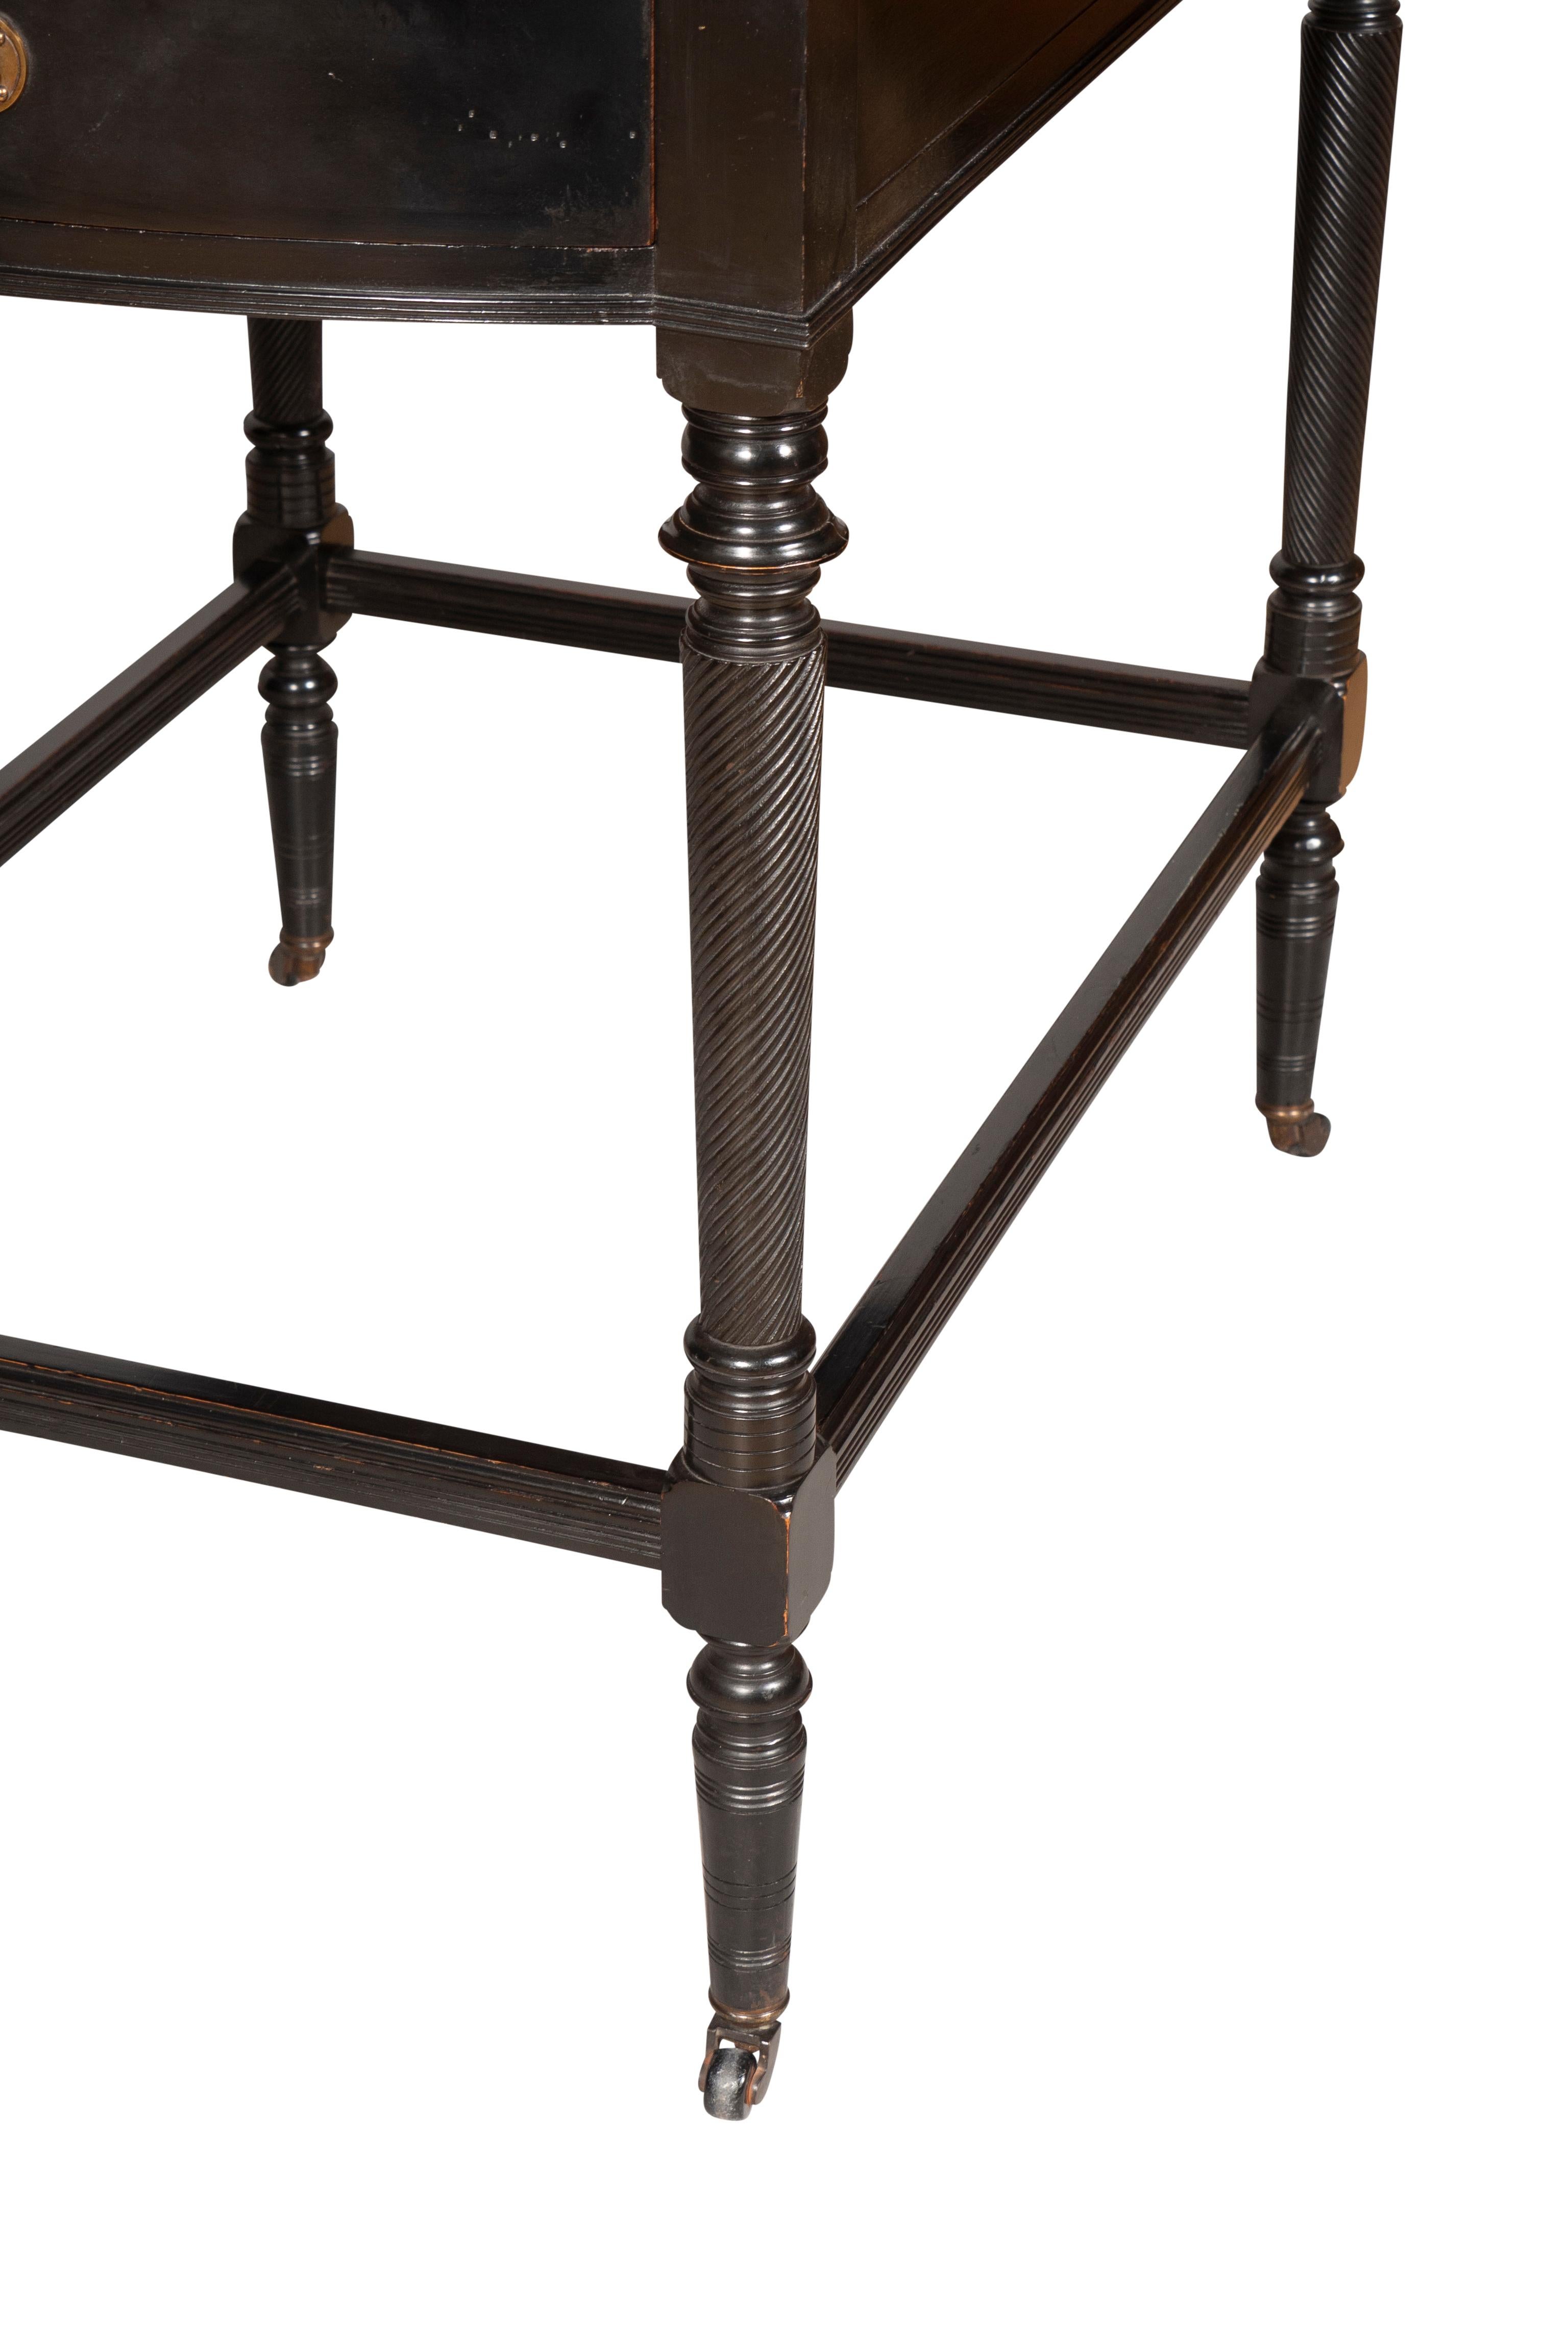 Aesthetic Movement Calamander and Ebonized Pembroke Table For Sale 12